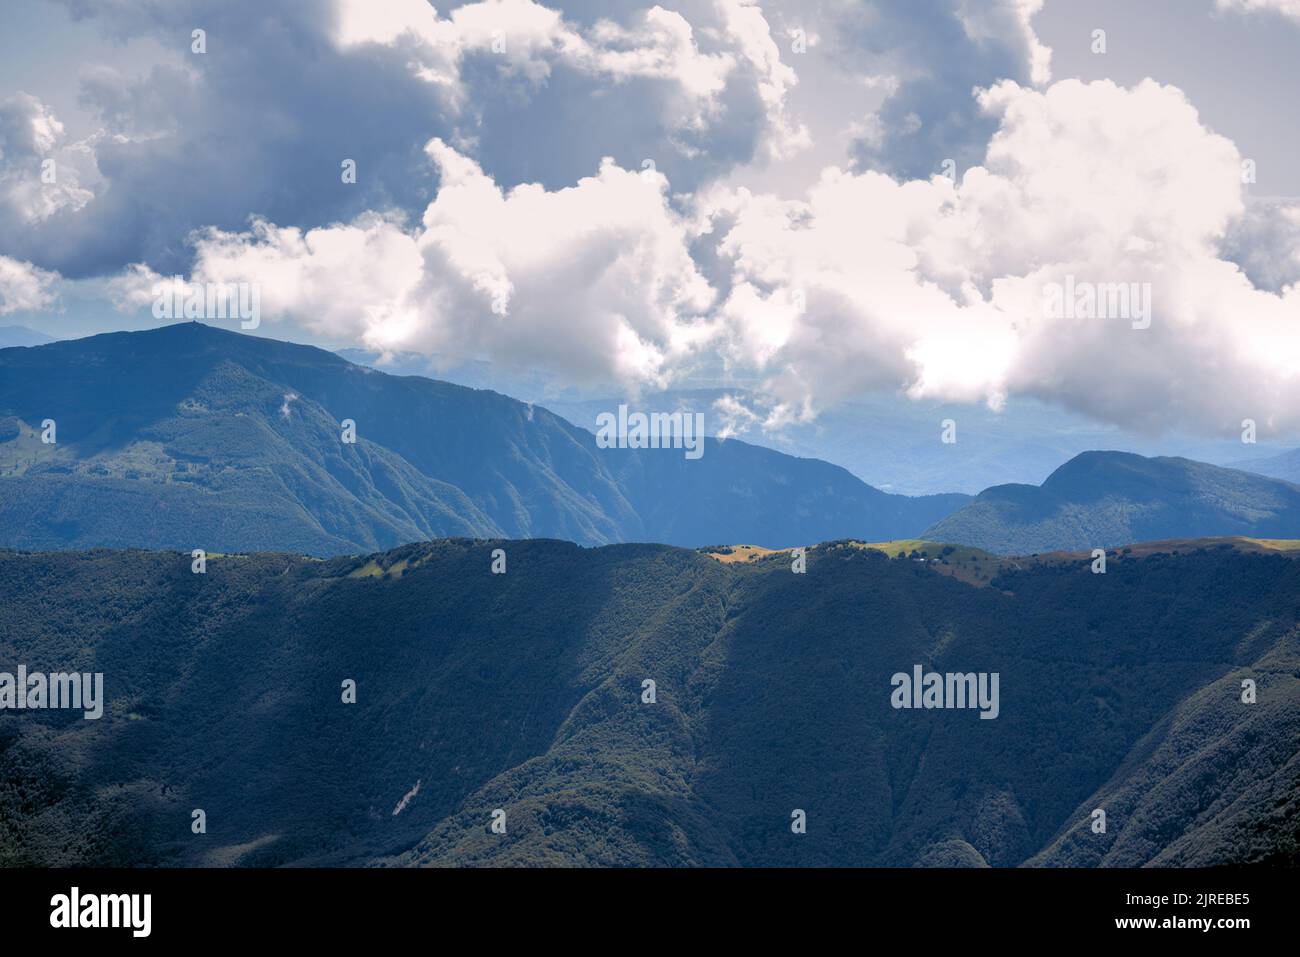 Clouds above mountains Stock Photo